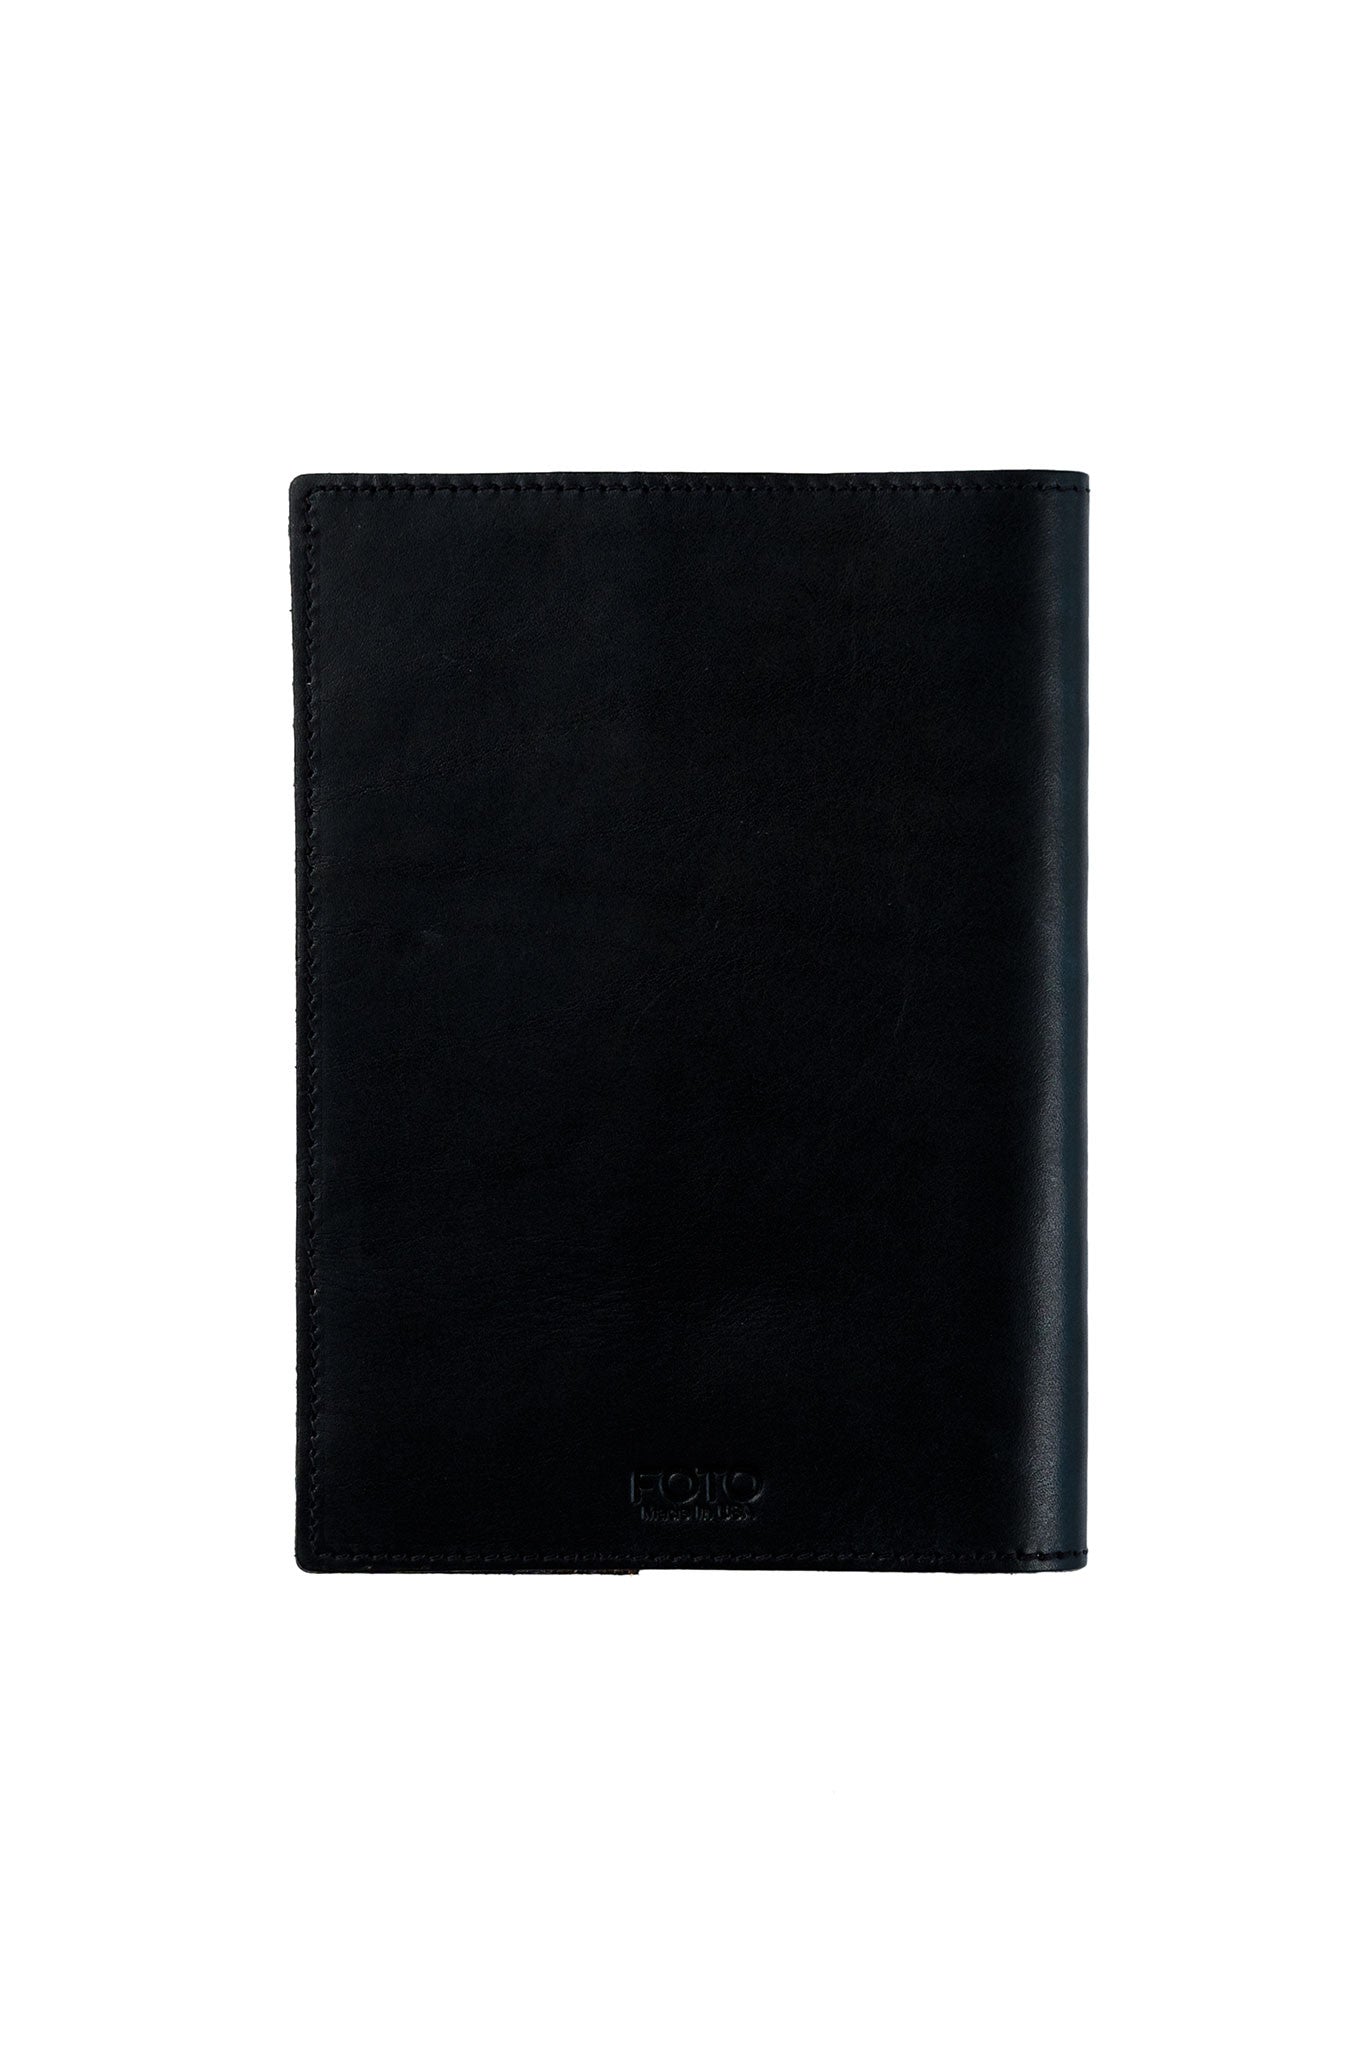 FOTO | Black Leather Journal - refillable genuine leather journal cover can be personalized with gold foil initials, a monogram or business logo making it the perfect personalized gift. 